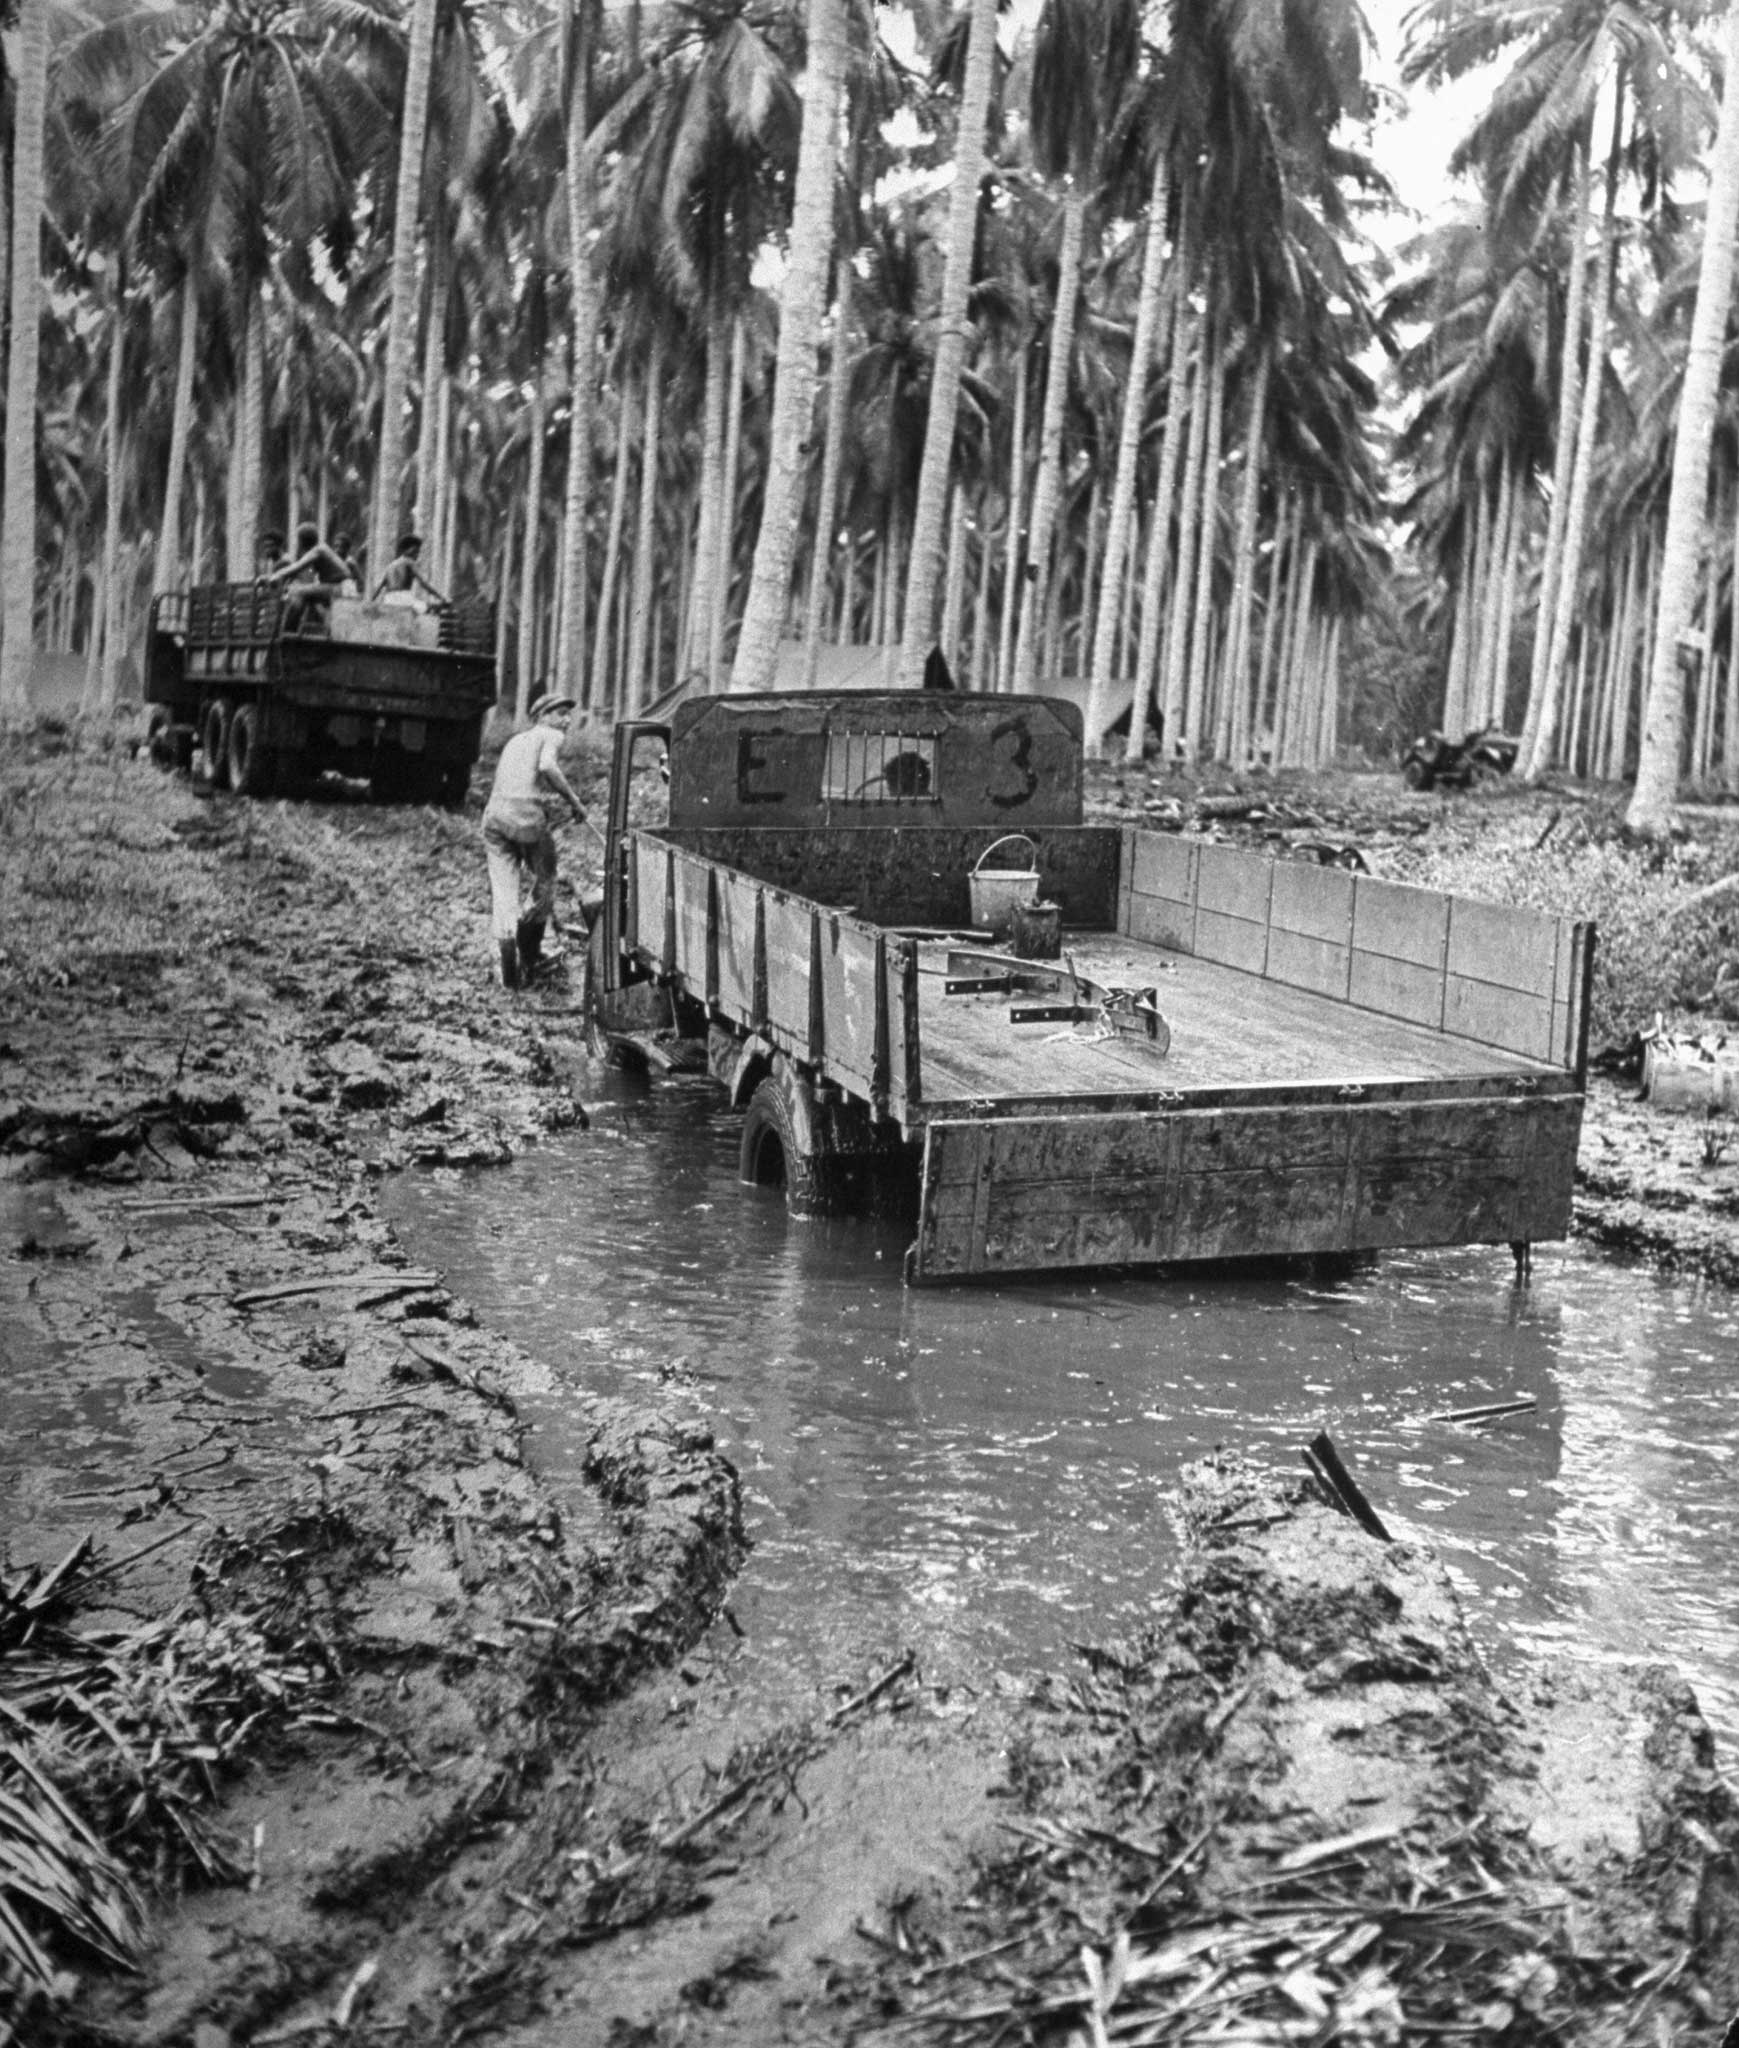 "Trucks get stuck in hub-deep mud on their way back from the front over newly constructed road. In the background are huge coconut palm trees, planted in even rows in 1908 by Lever Bros. for their soap business."